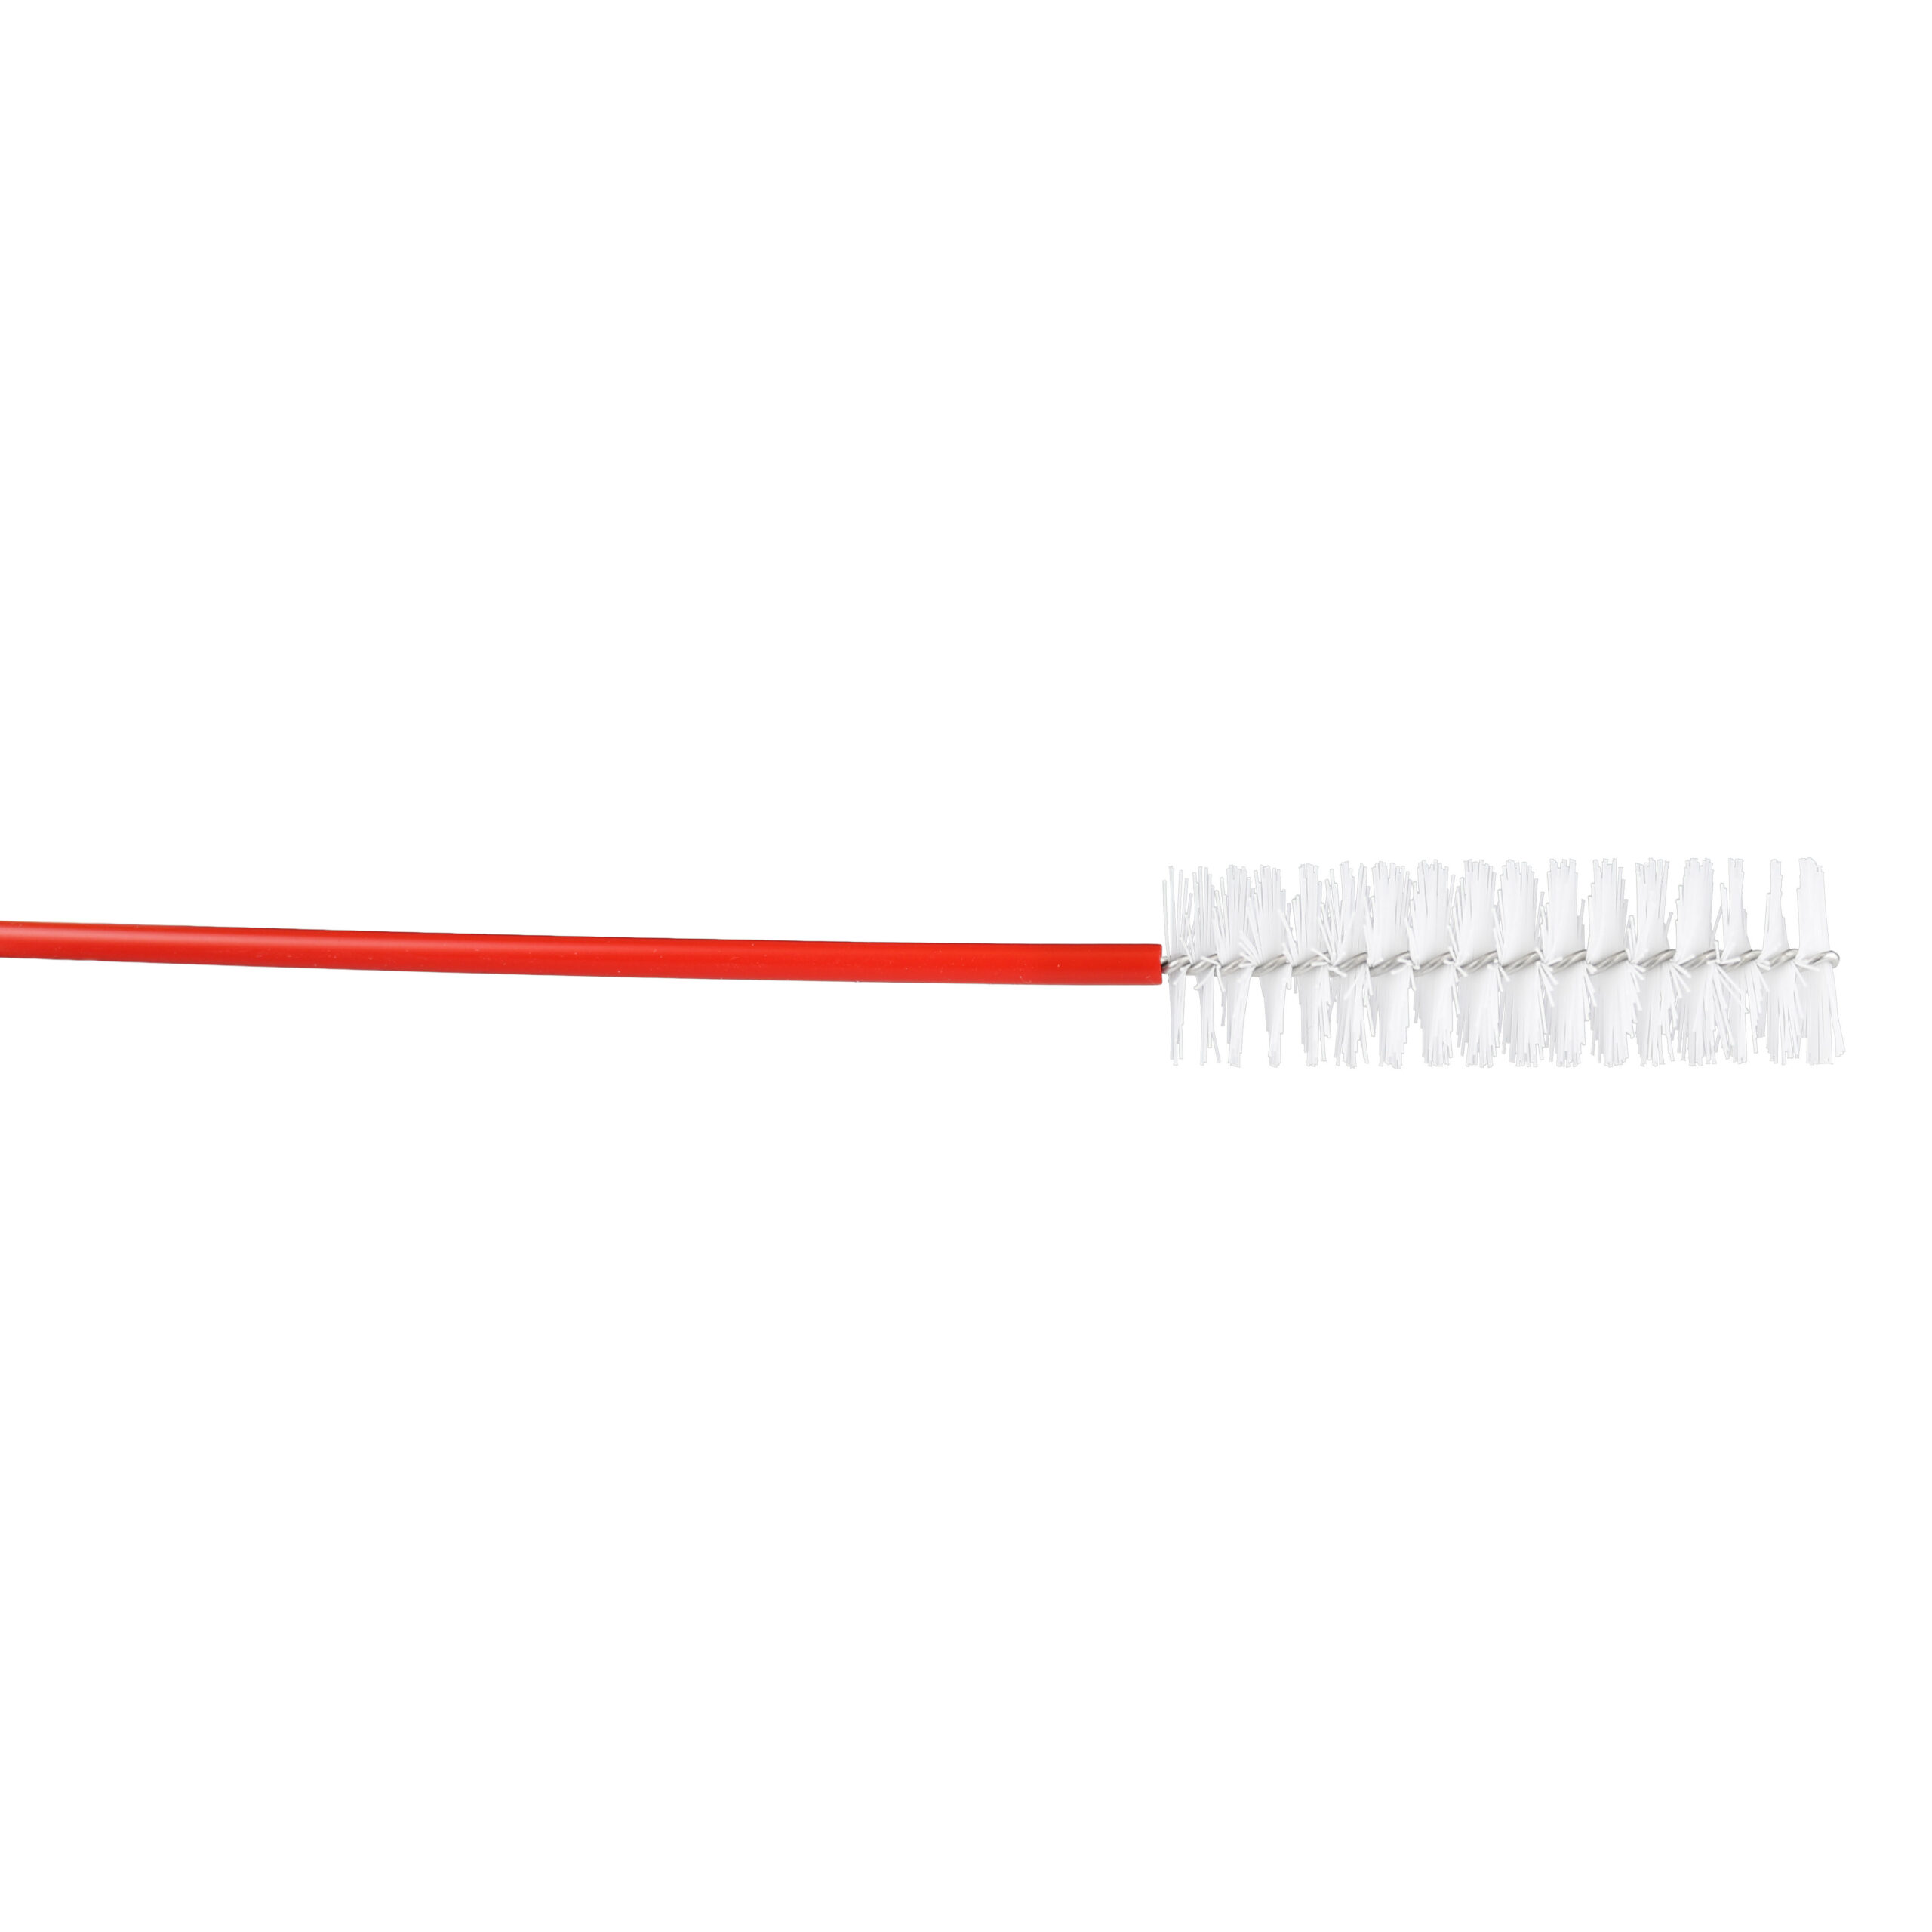 Instrument Care - 3183-P and MR001903 Instrument Cleaning Brushes -  Healthmark Industries